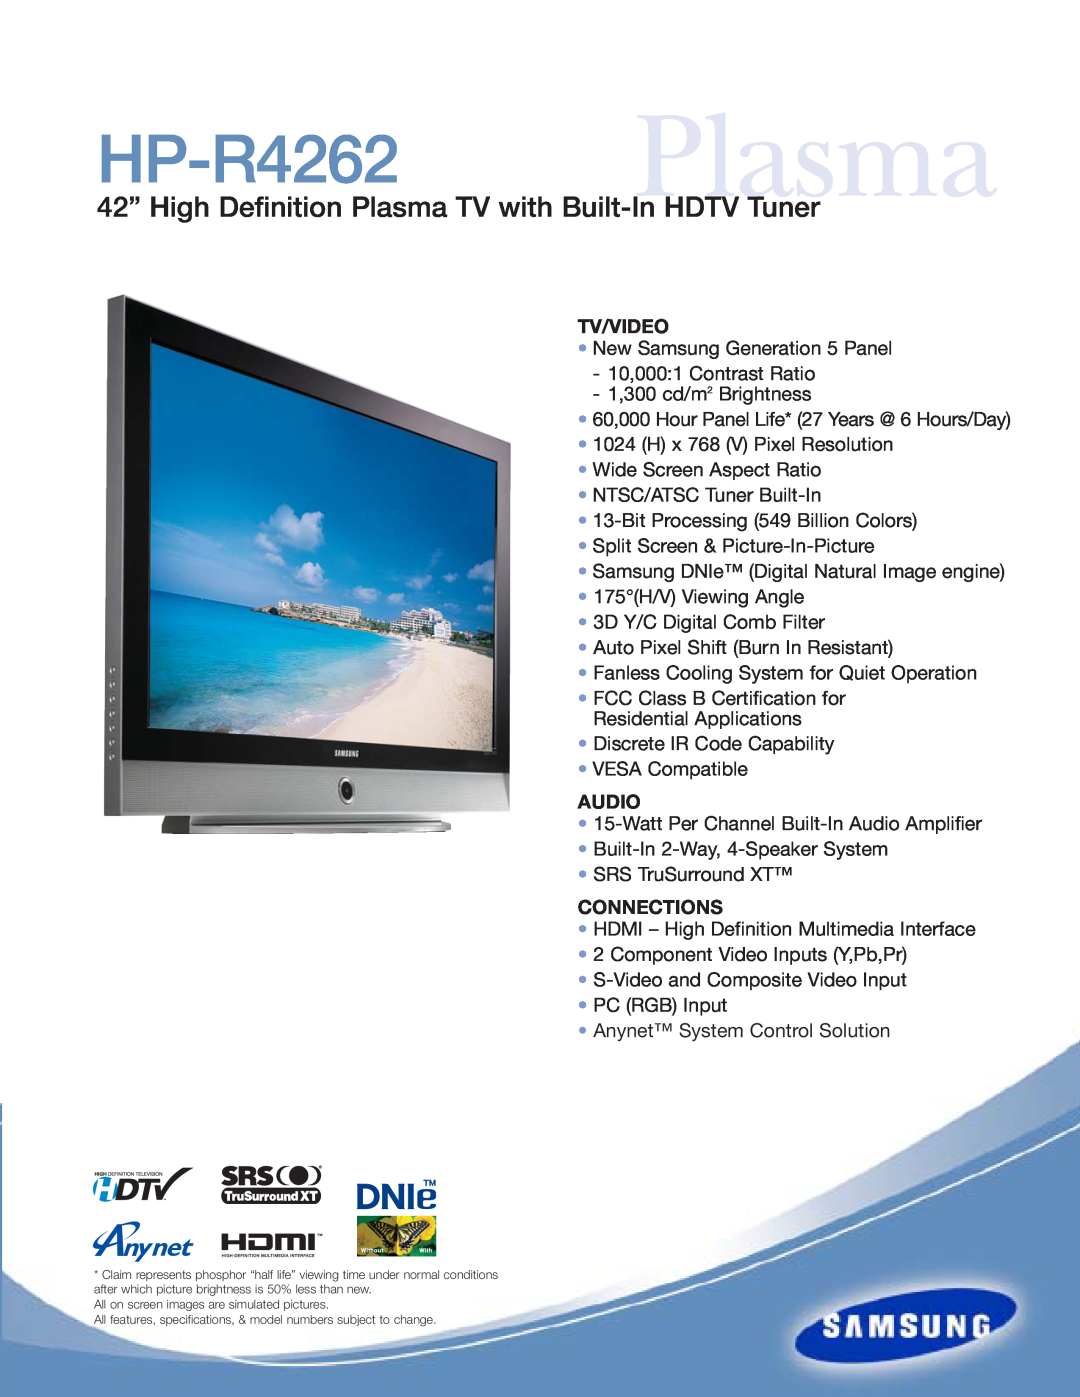 Samsung specifications HP-R4262 Plasma, 42” High Definition Plasma TV with Built-In HDTV Tuner, Tv/Video, Audio 